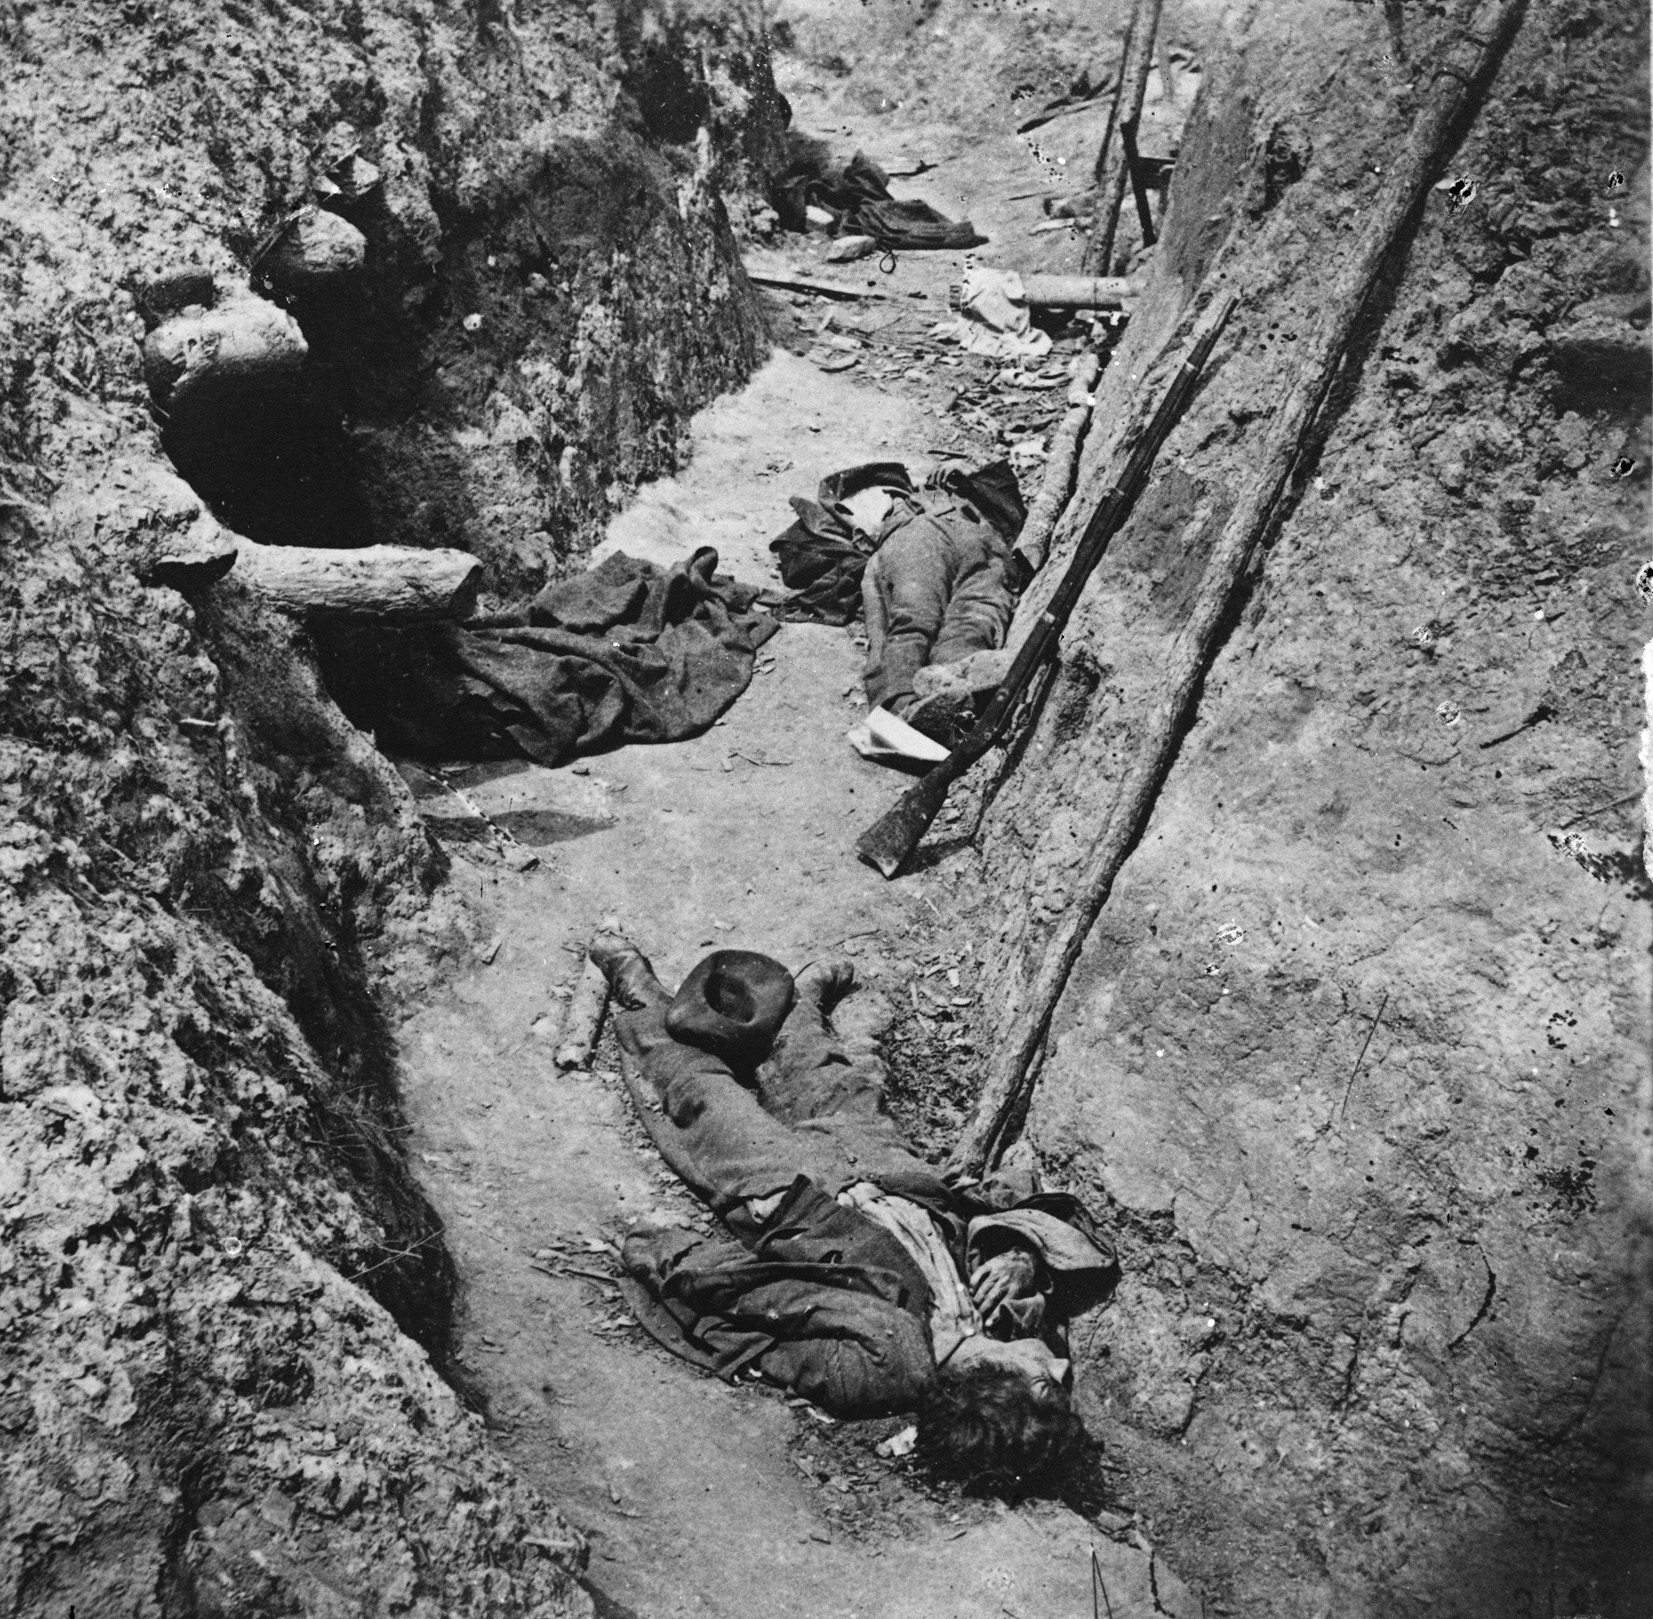 Dead Confederate soldiers lie fallen in the fetid trenches of Fort Mahone, outside Petersburg, Virginia. A former Brady associate, Thomas C. Roche, recorded the macabre image.